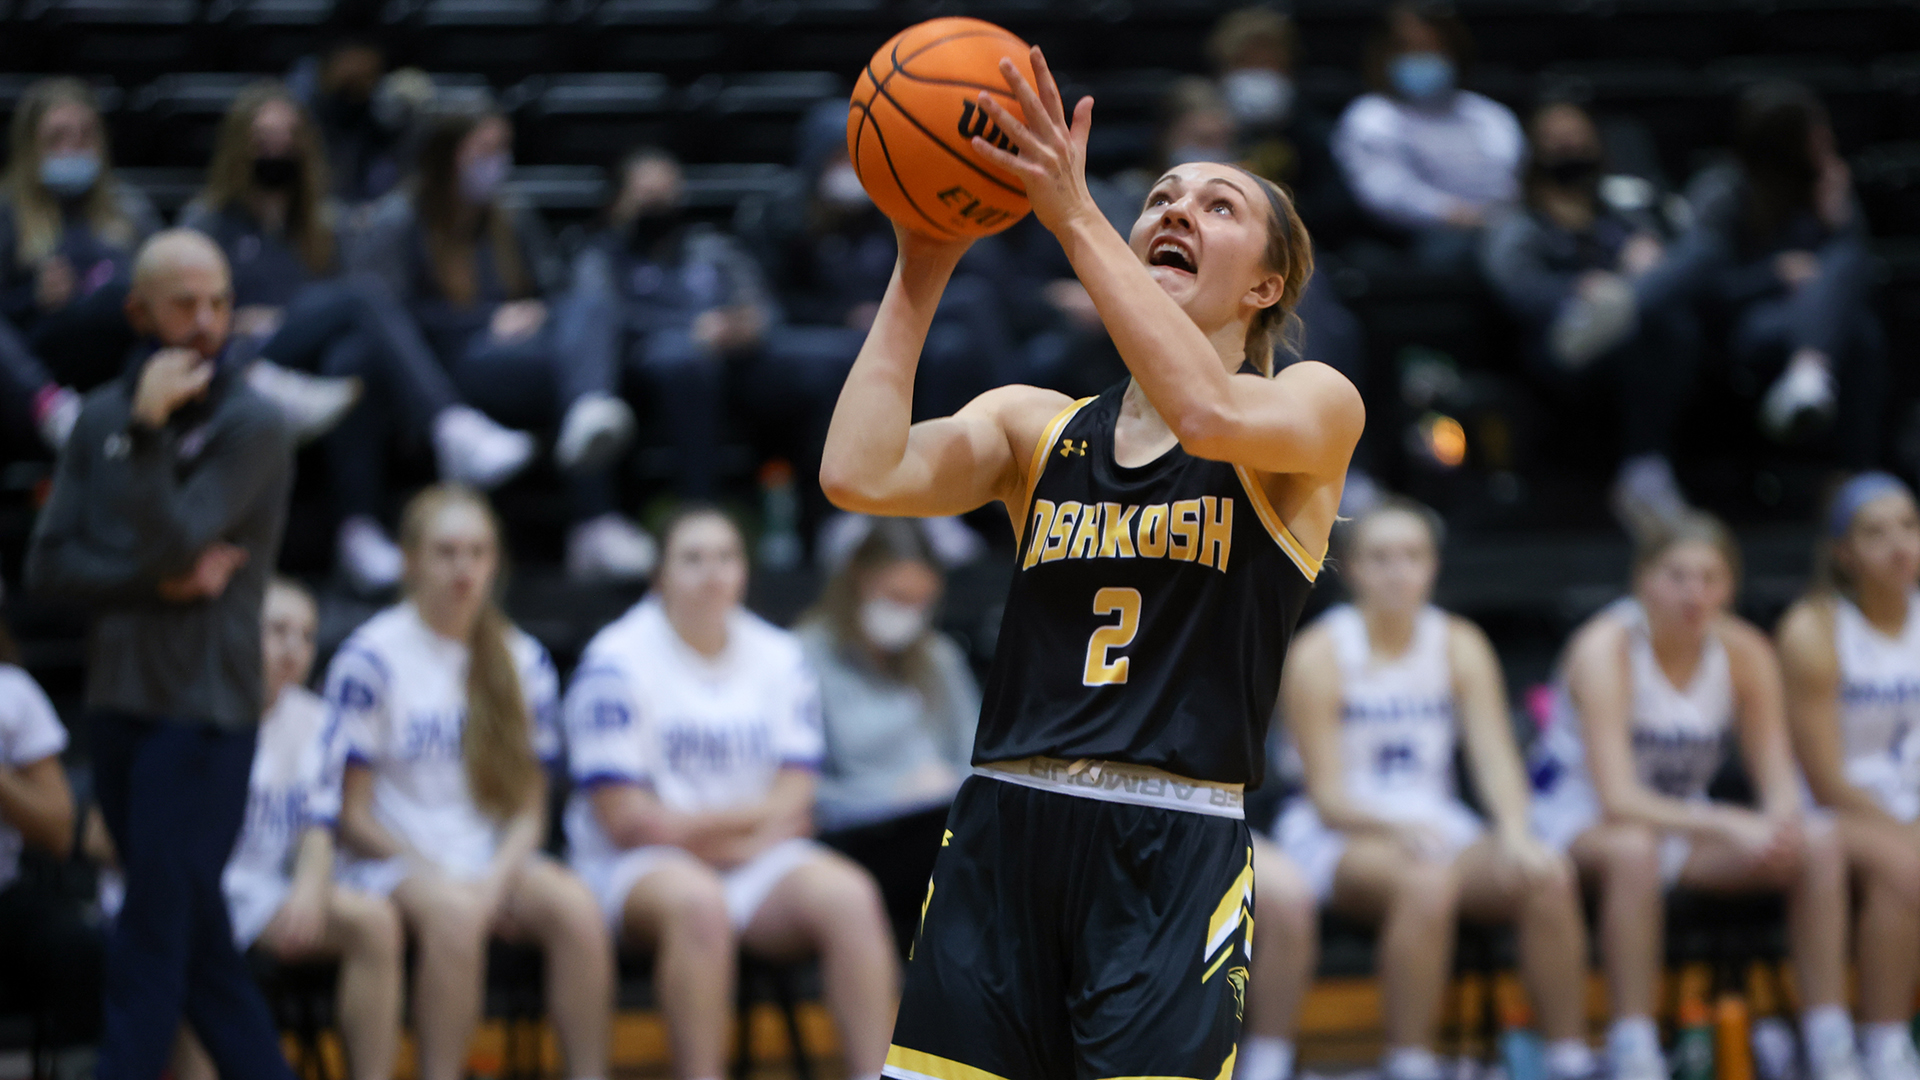 Abby Kaiser scored nine points with four rebounds against the Spartans.